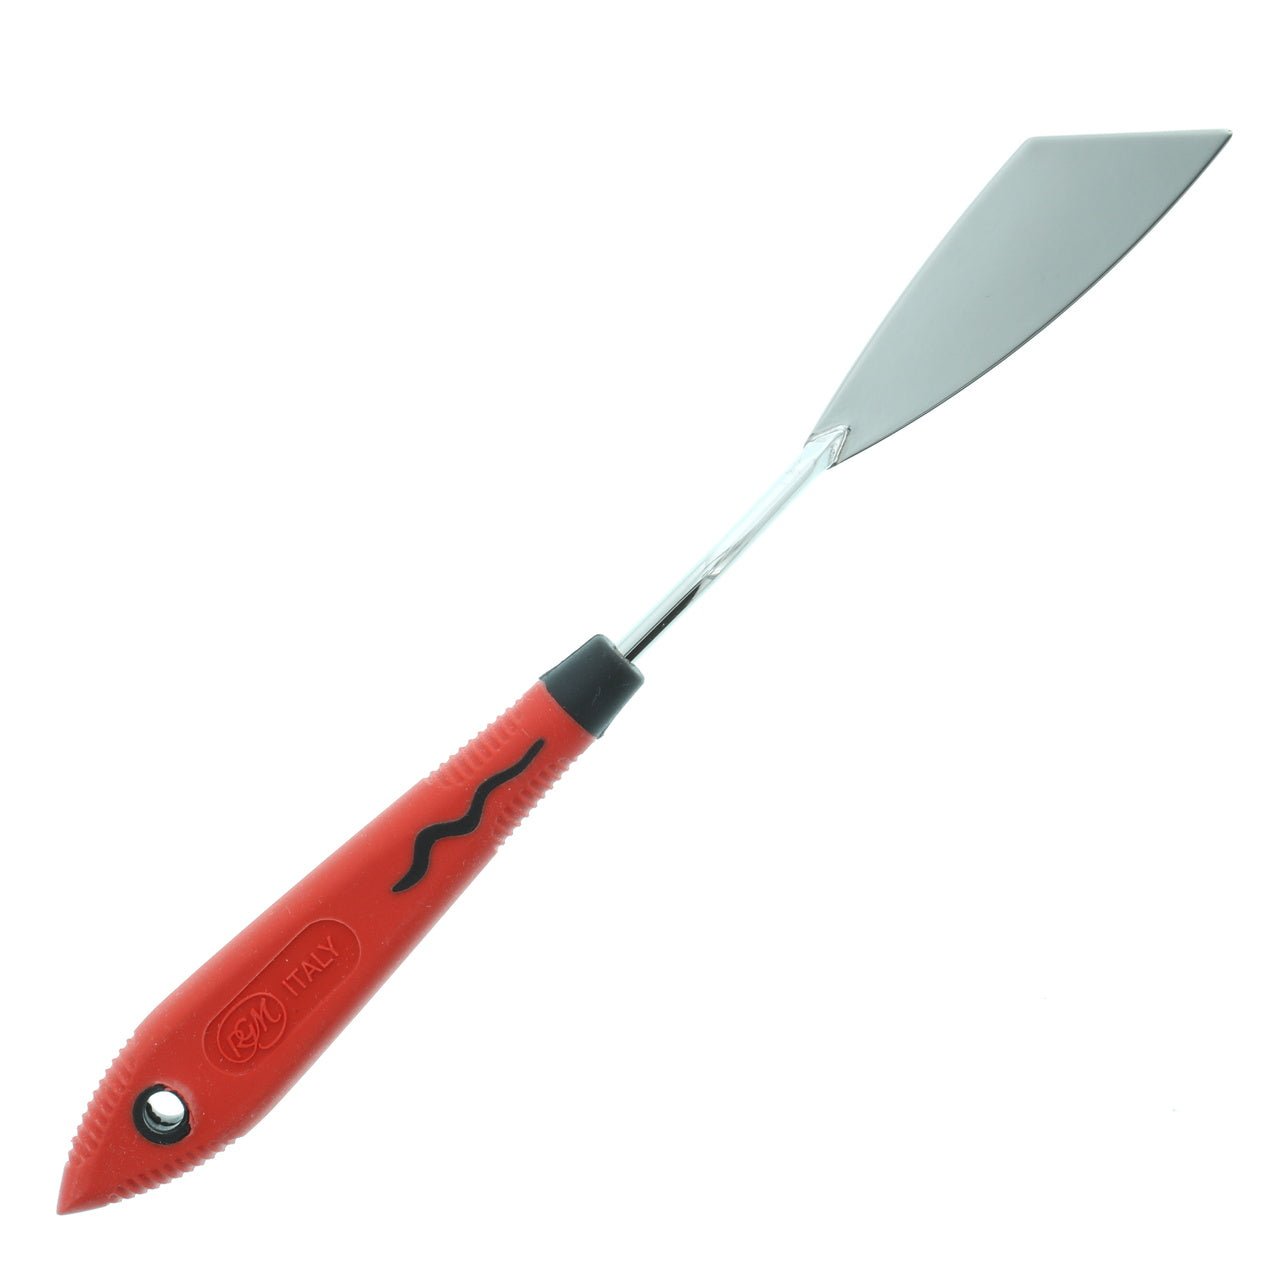 RGM Soft Grip Painting Knife #062 (Red Handle)